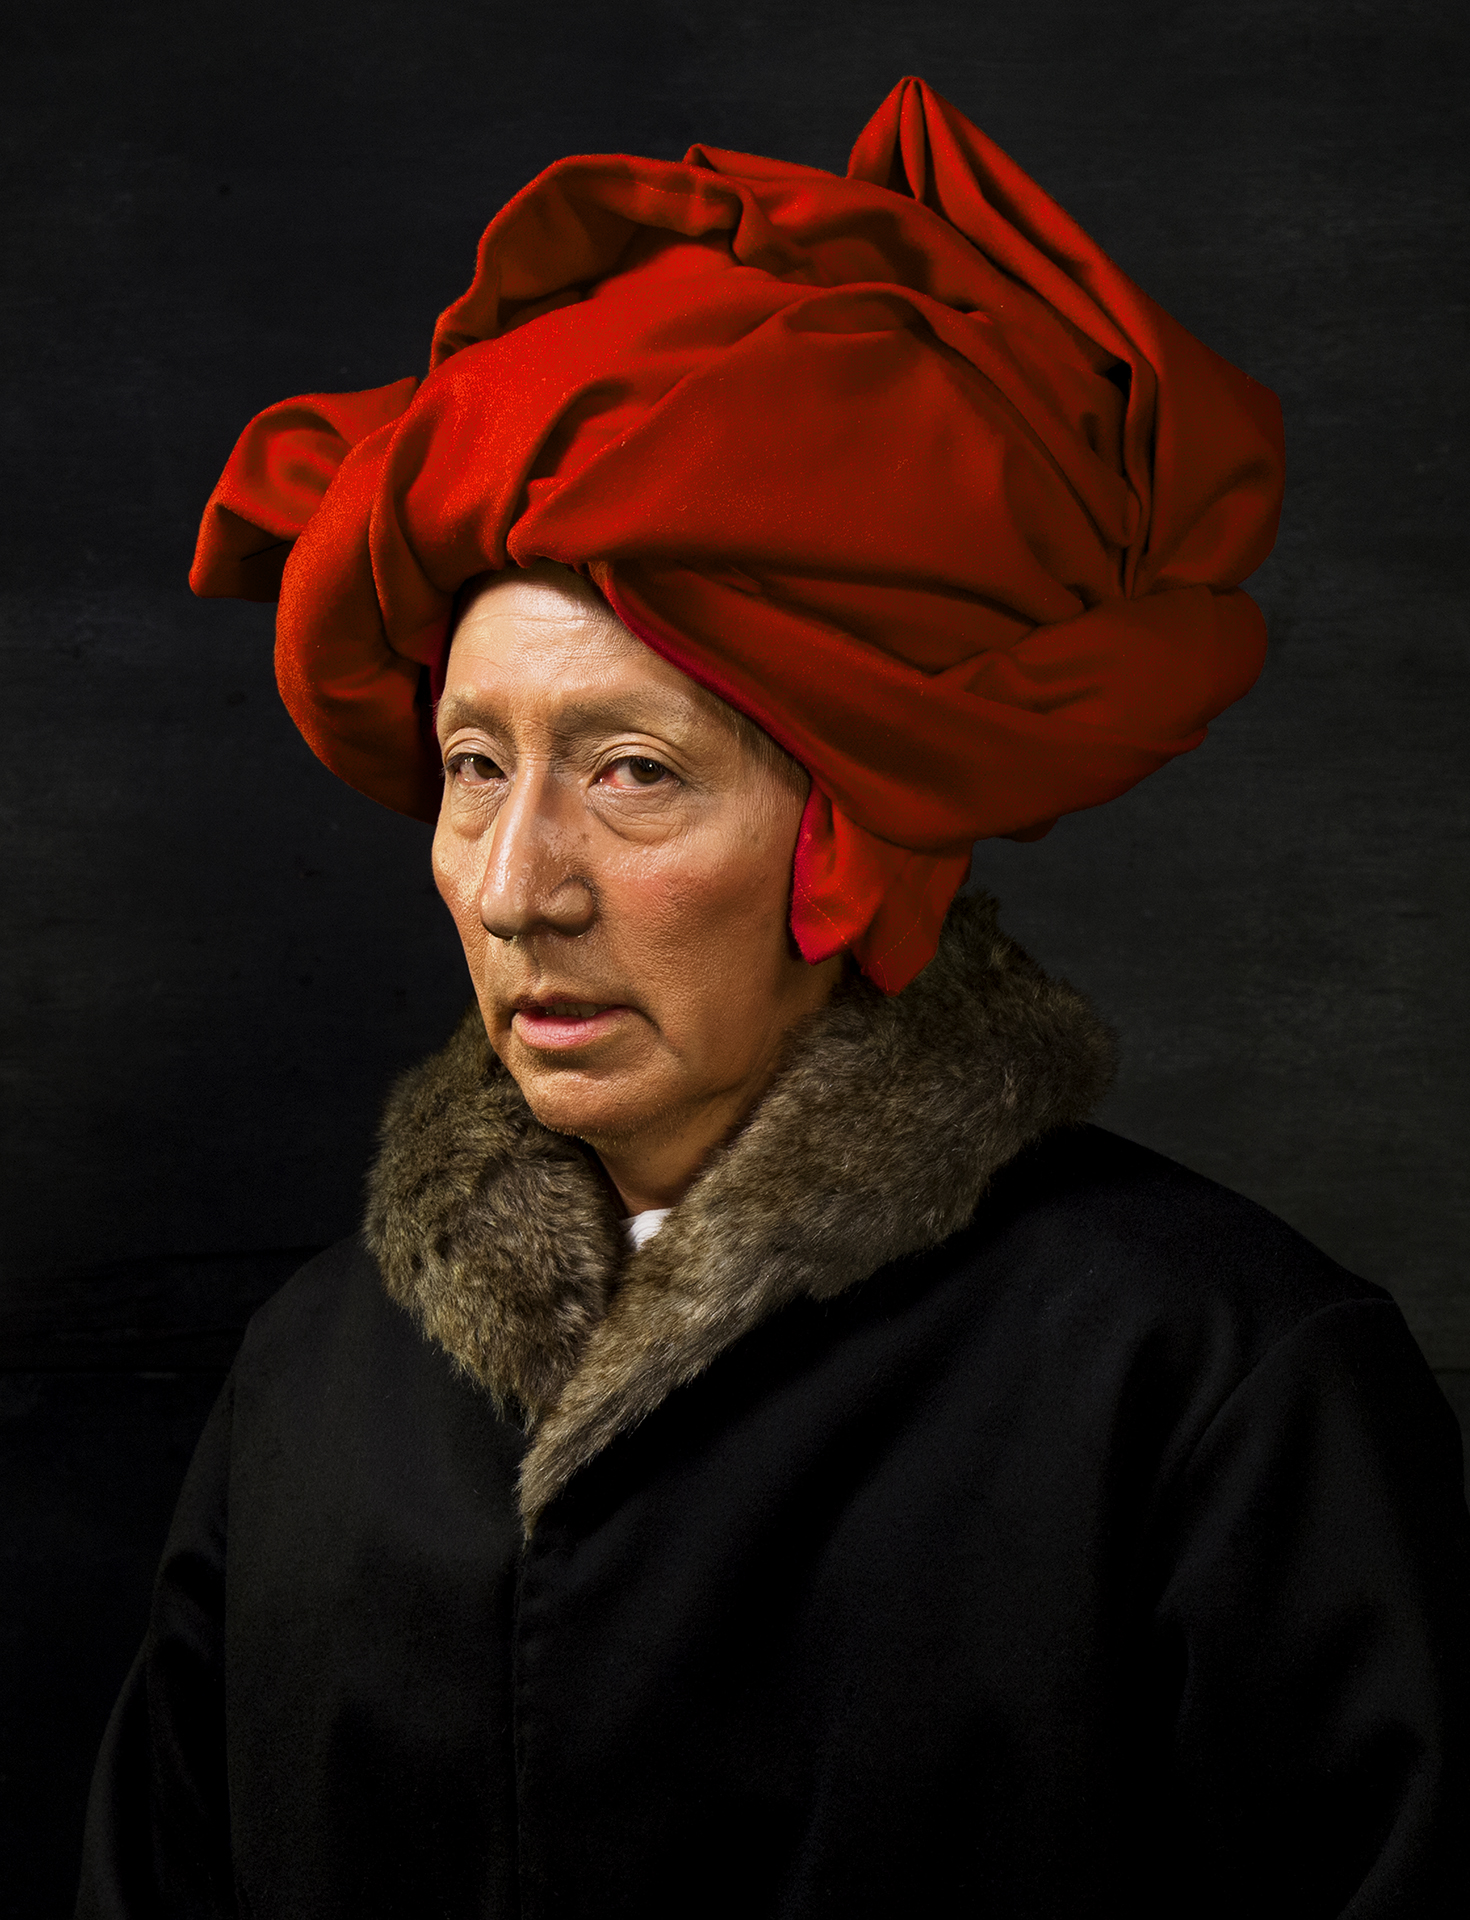 Self-Portraits through Art History (Van Eyck in a Red Turban), 2016. Courtesy of the artist and Luhring Augustine, New York. © Yasumasa Morimura 